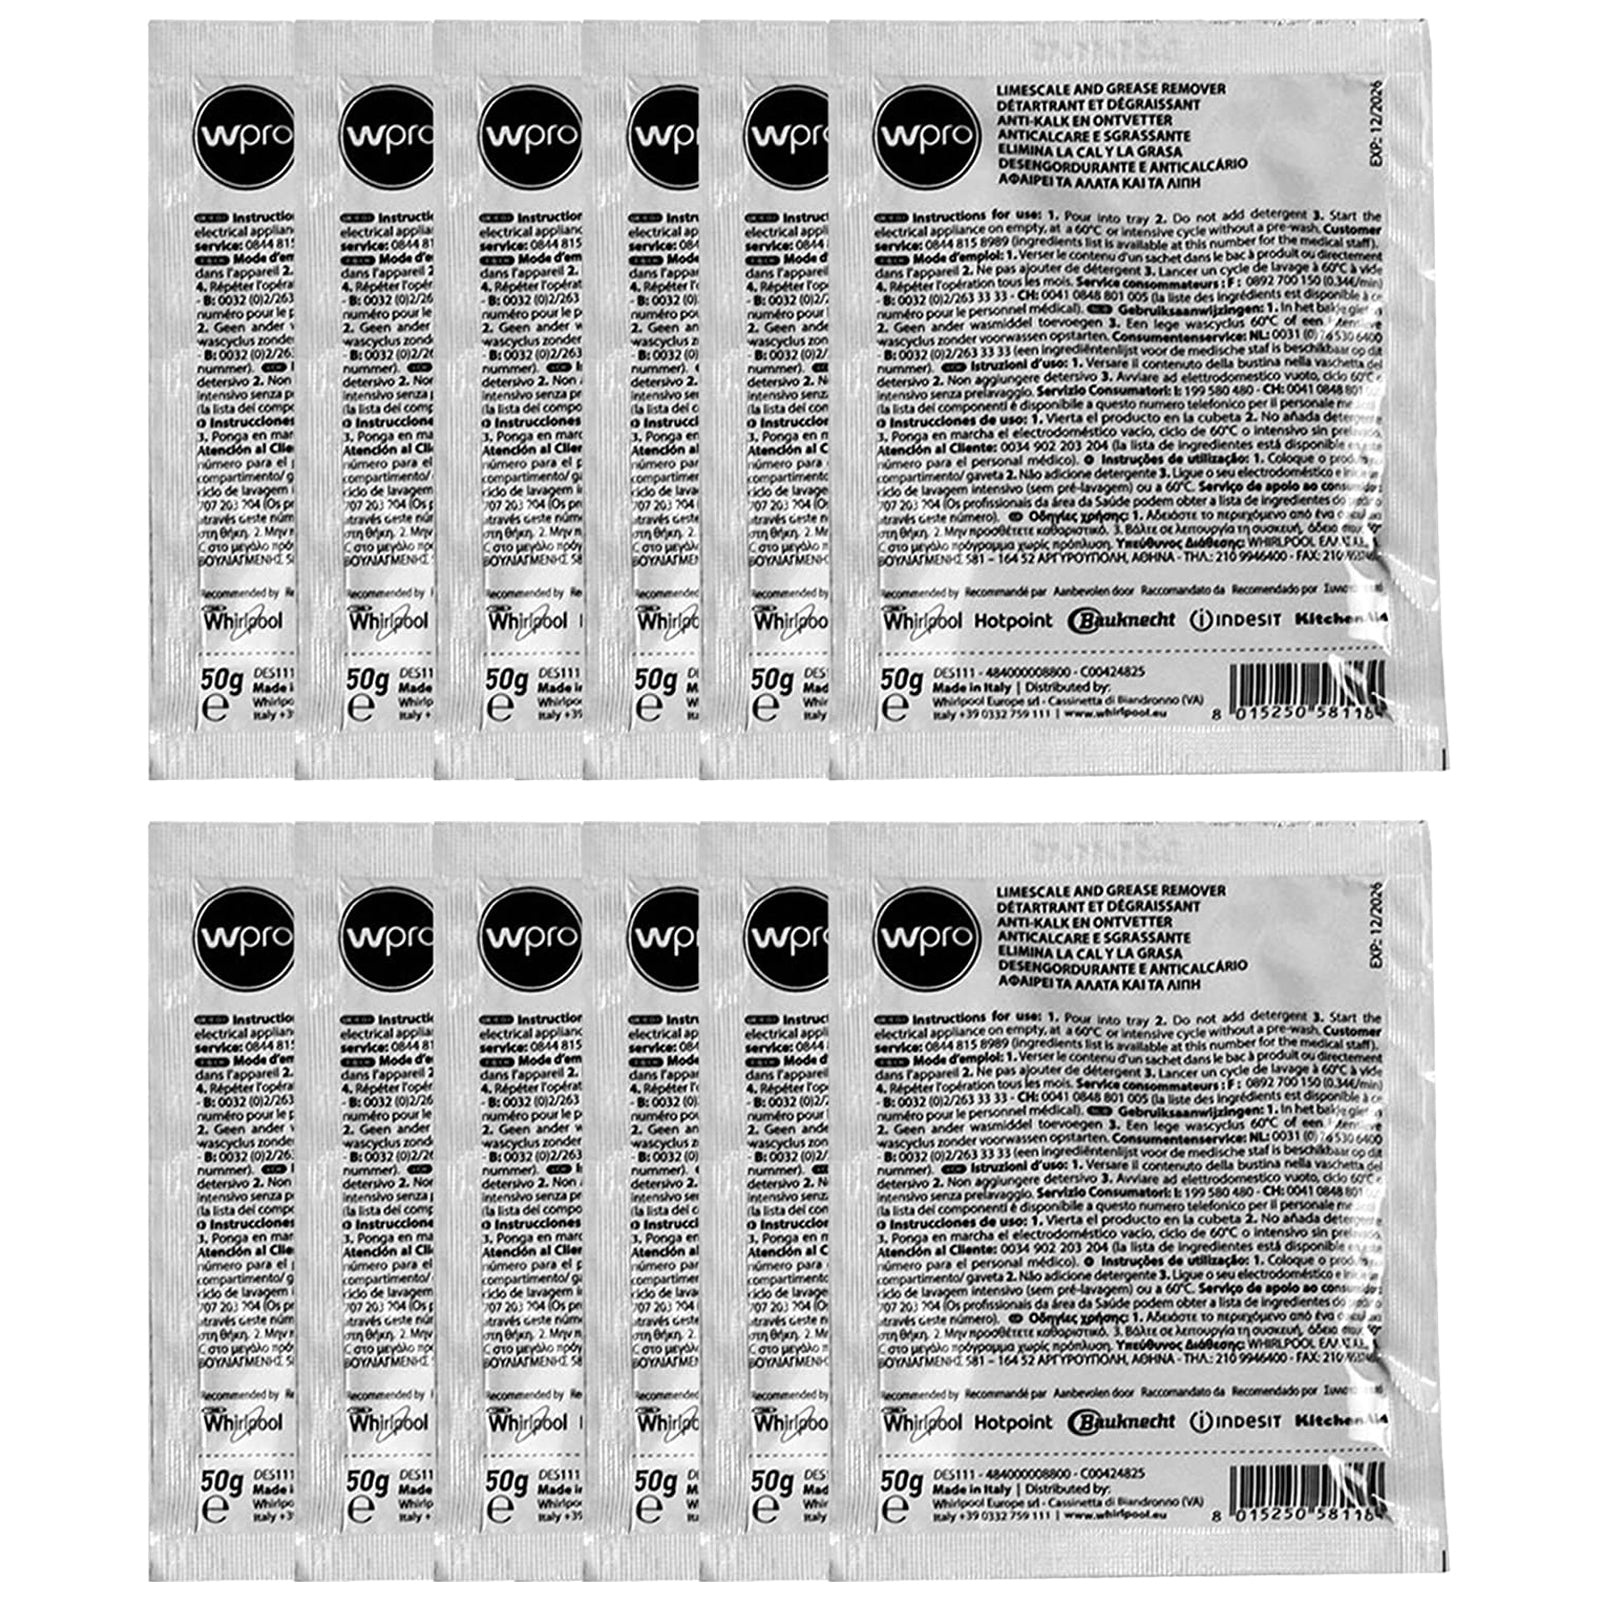 Universal Limescale & Grease Remover Washing Machine Dishwasher Pack of 12 C00424828